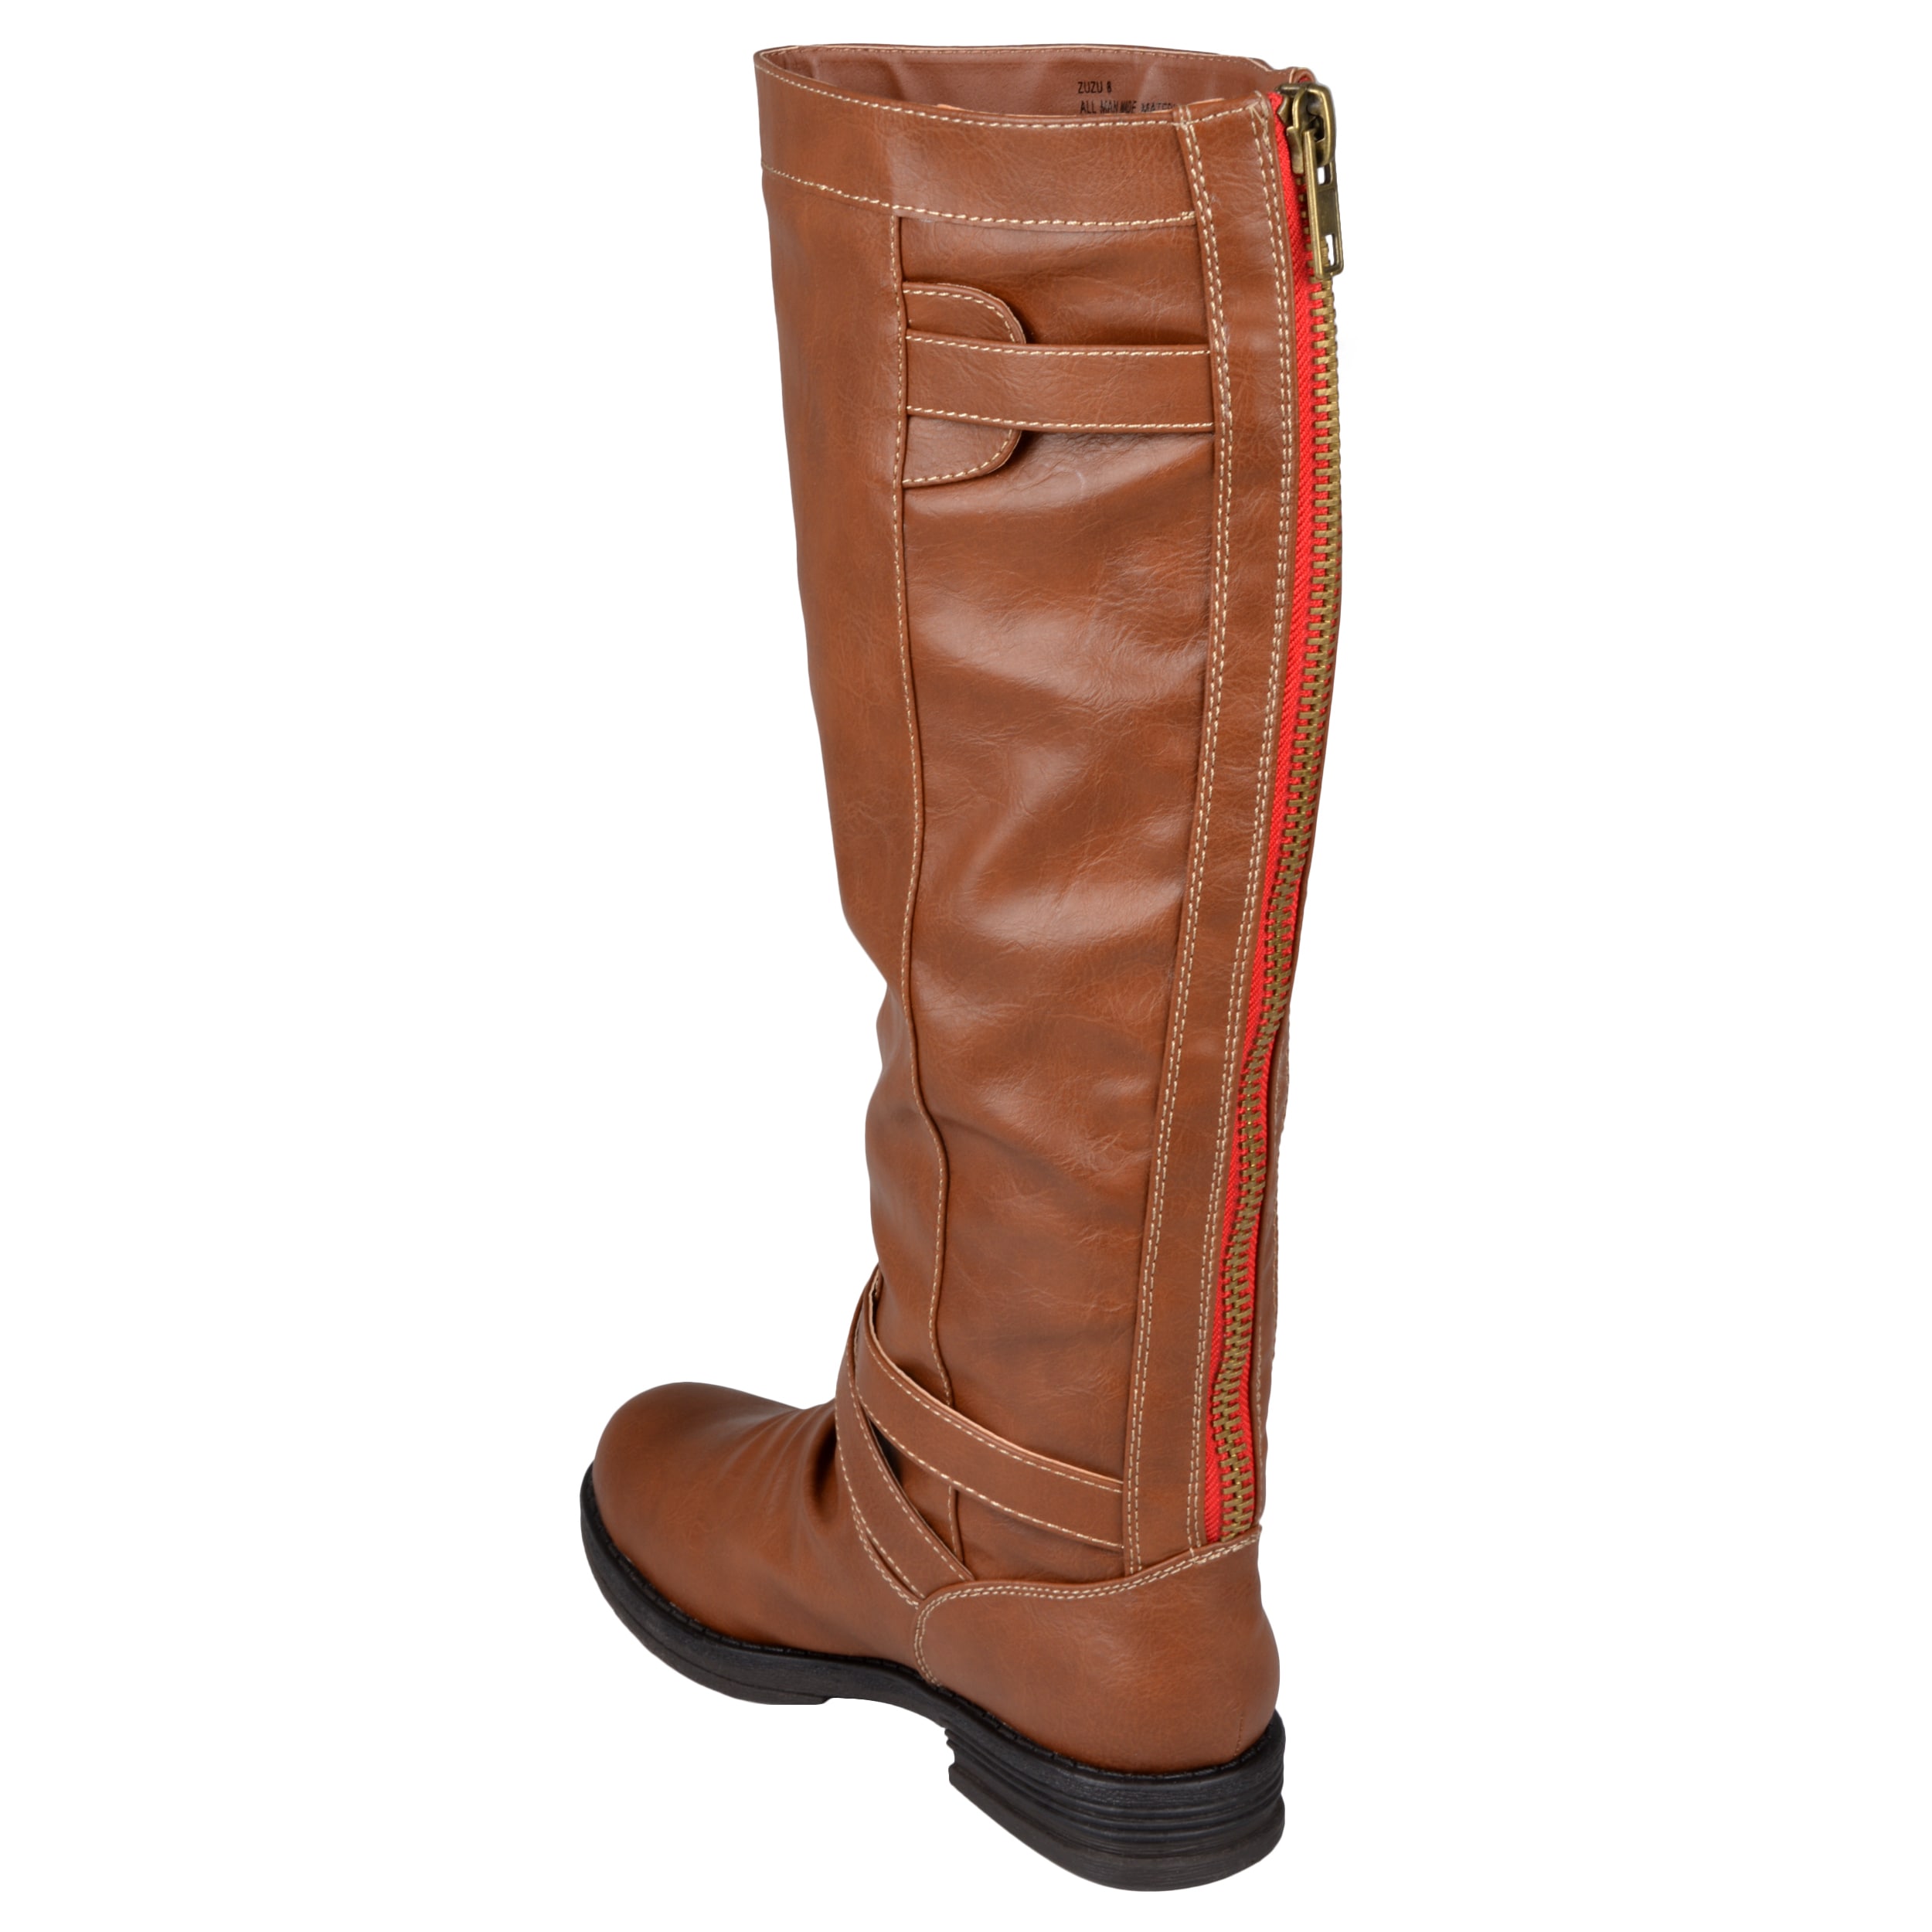 steve madden boots with red zipper up the back